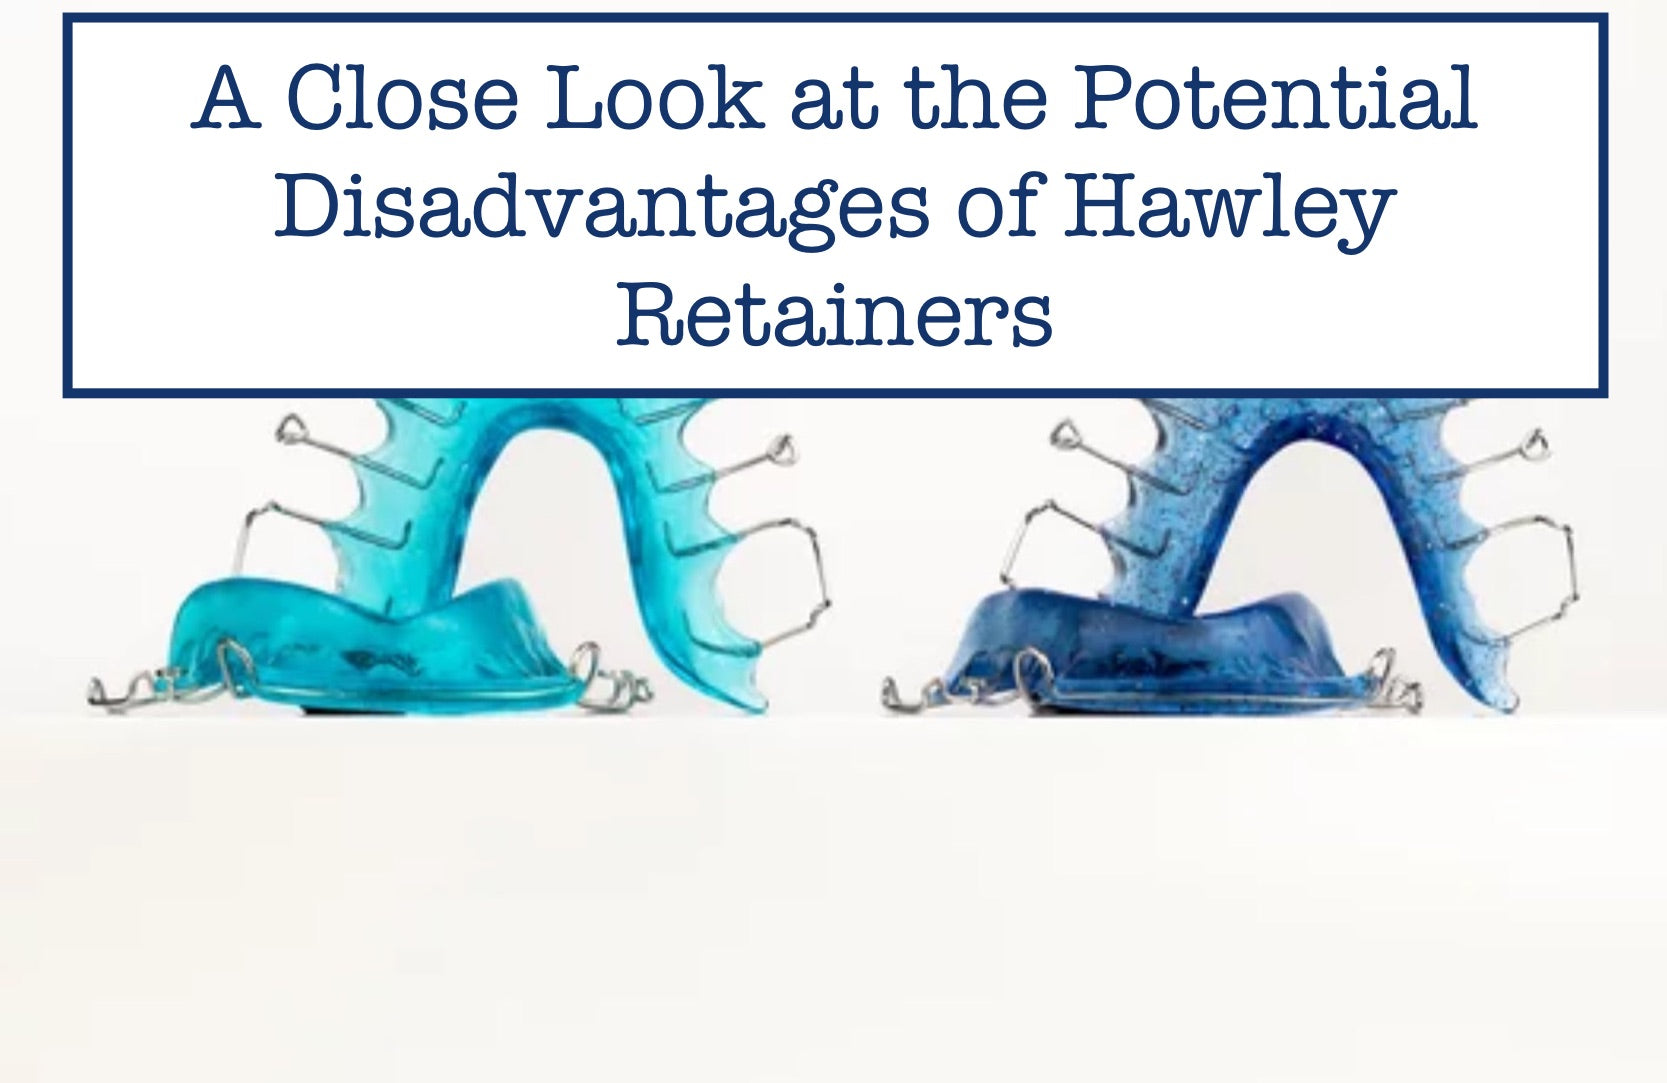 A Close Look at the Potential Disadvantages of Hawley Retainers